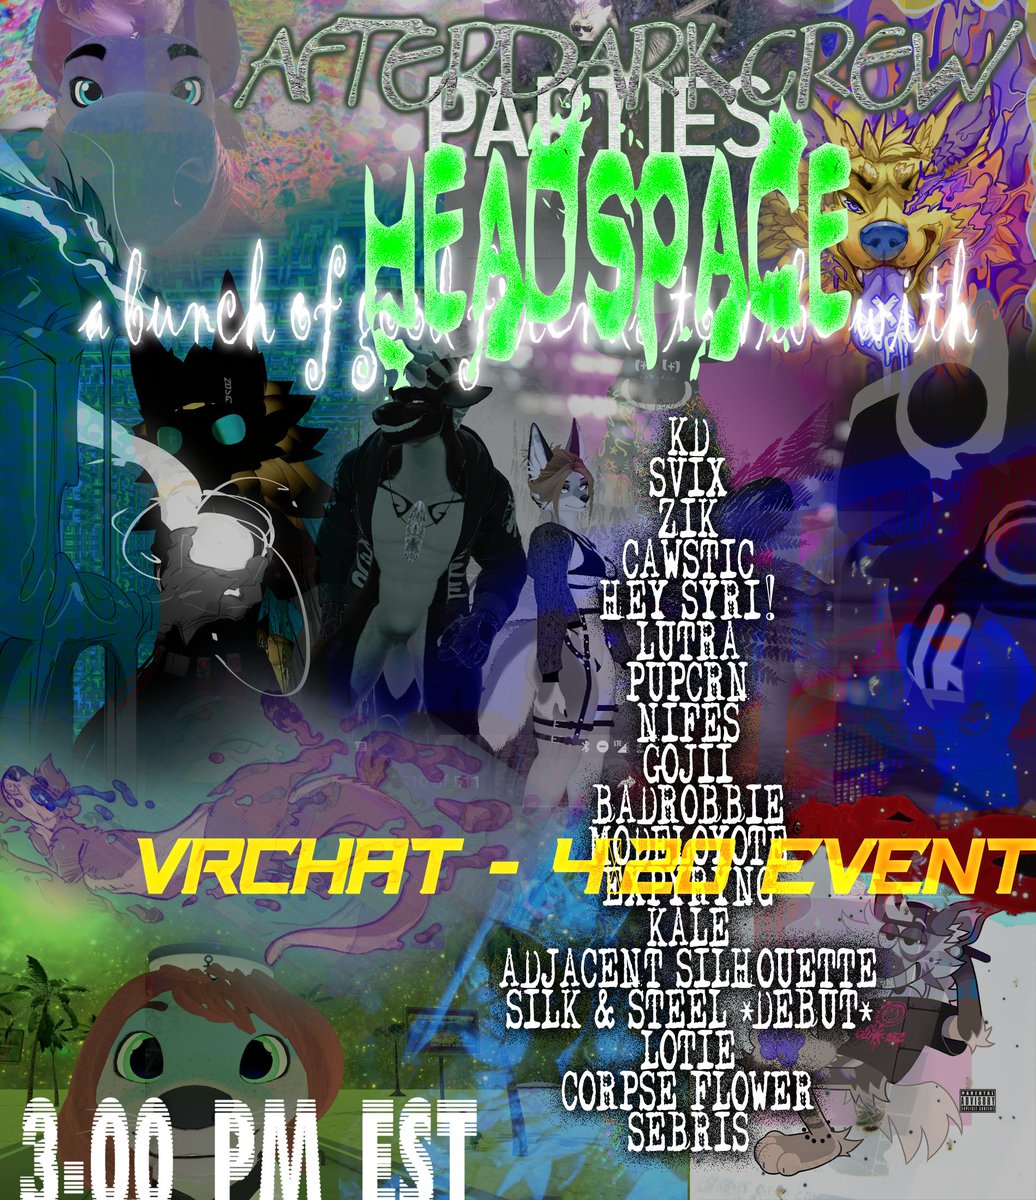 H ẹ å d S p å c ẹ : A 4-20 VRCHAT Urlfest This will be one of our most unique urlfest events with a fully fleshed out world thanks to Sebris. A night to get lost in the clouds and enjoy the weird, funky, and experimental tunes. Looking forward to yall tuning in. 💜